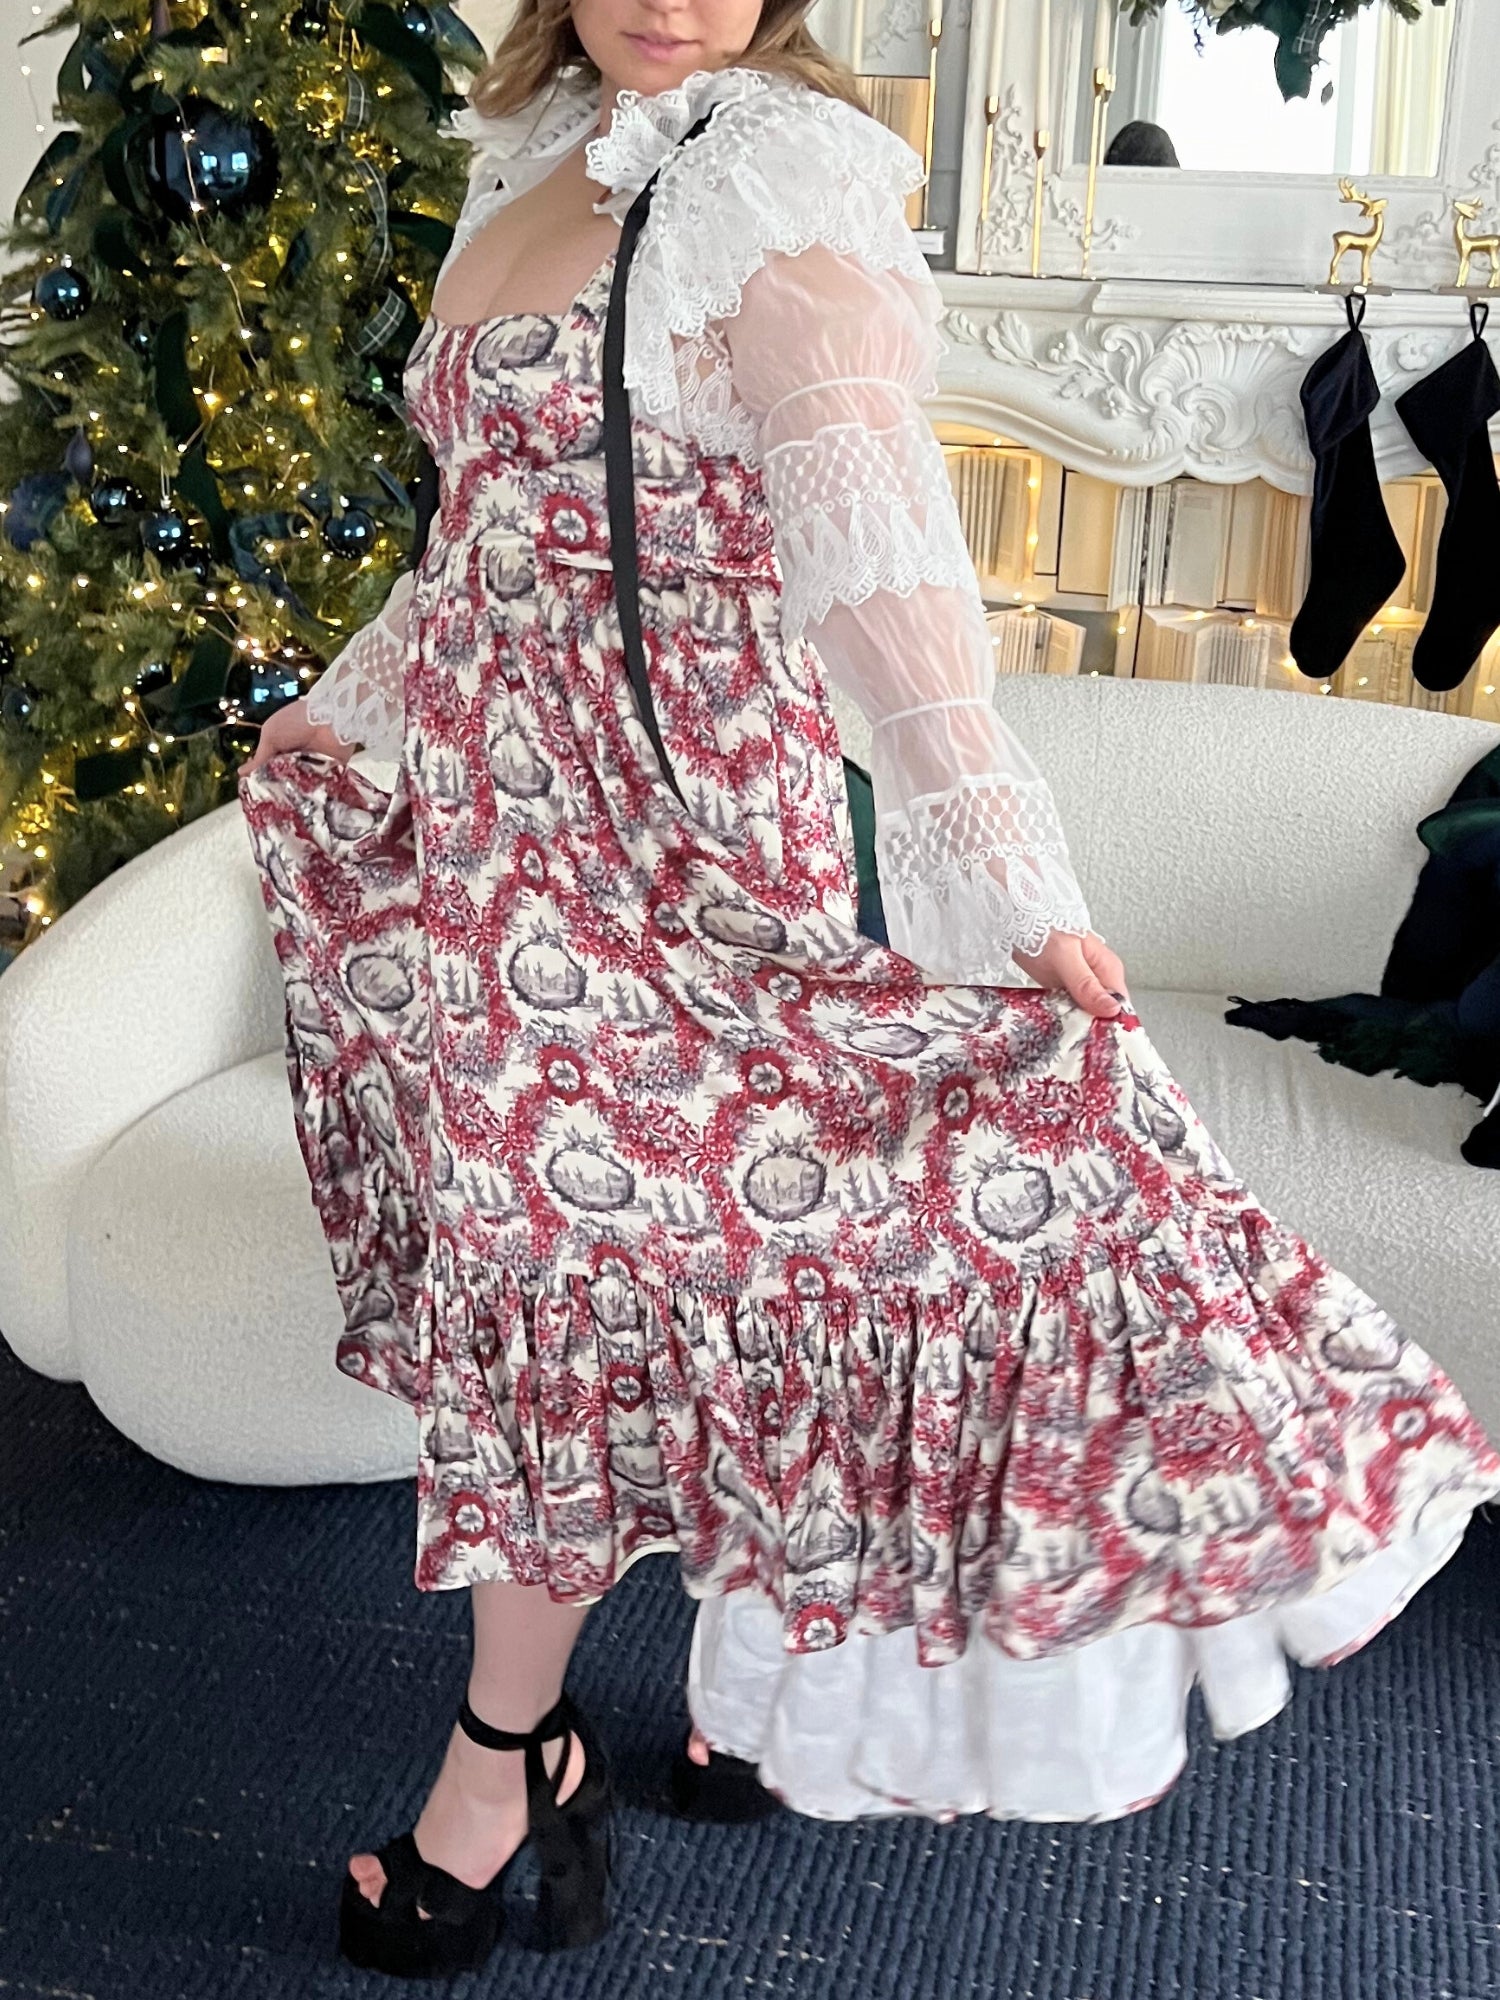 Winter Toile Satin Everyday Dress - Meet the Winter Toile Satin dress. Made with the silkiest satin, with the most detailed winter toile print, this dress is sure to become a favorite. The inverted U hemline will make you feel elongated while making you f